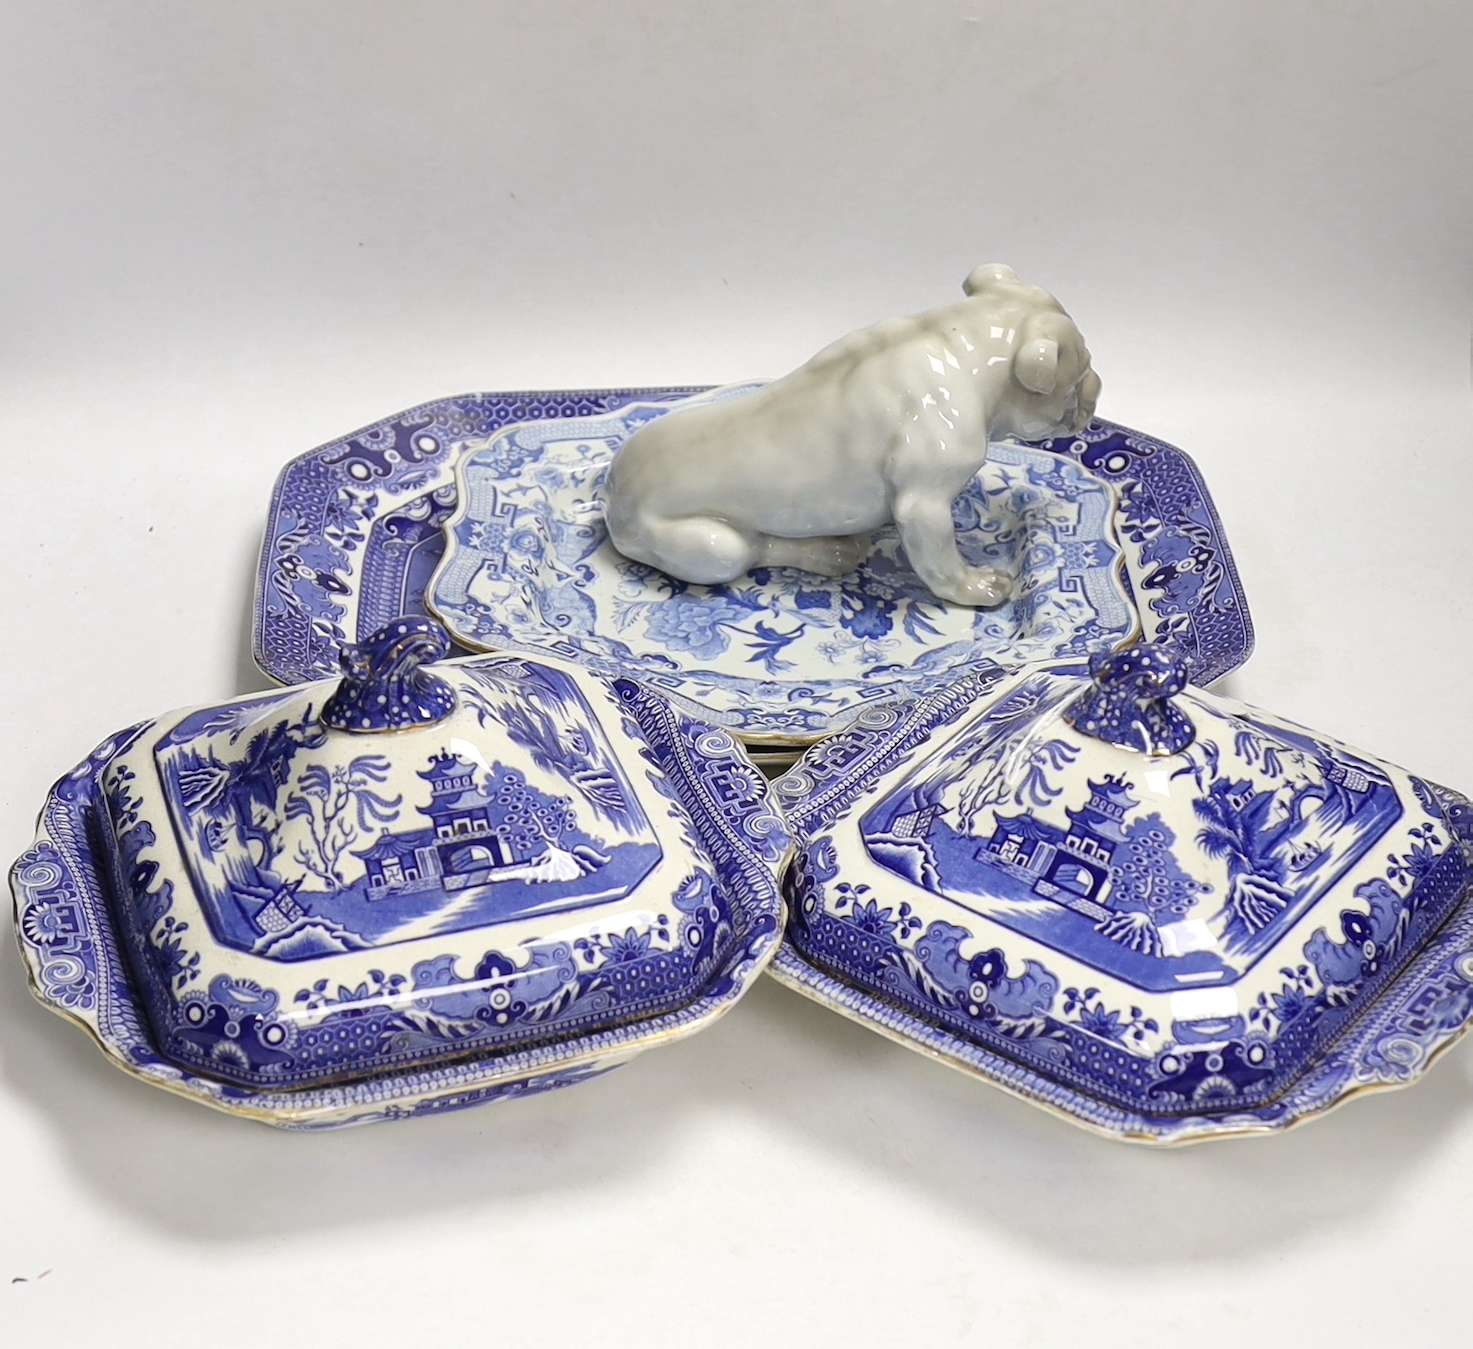 A Mason's stoneware blue and white plate, 2 tureens and a serving dish and a German model of a pug dog